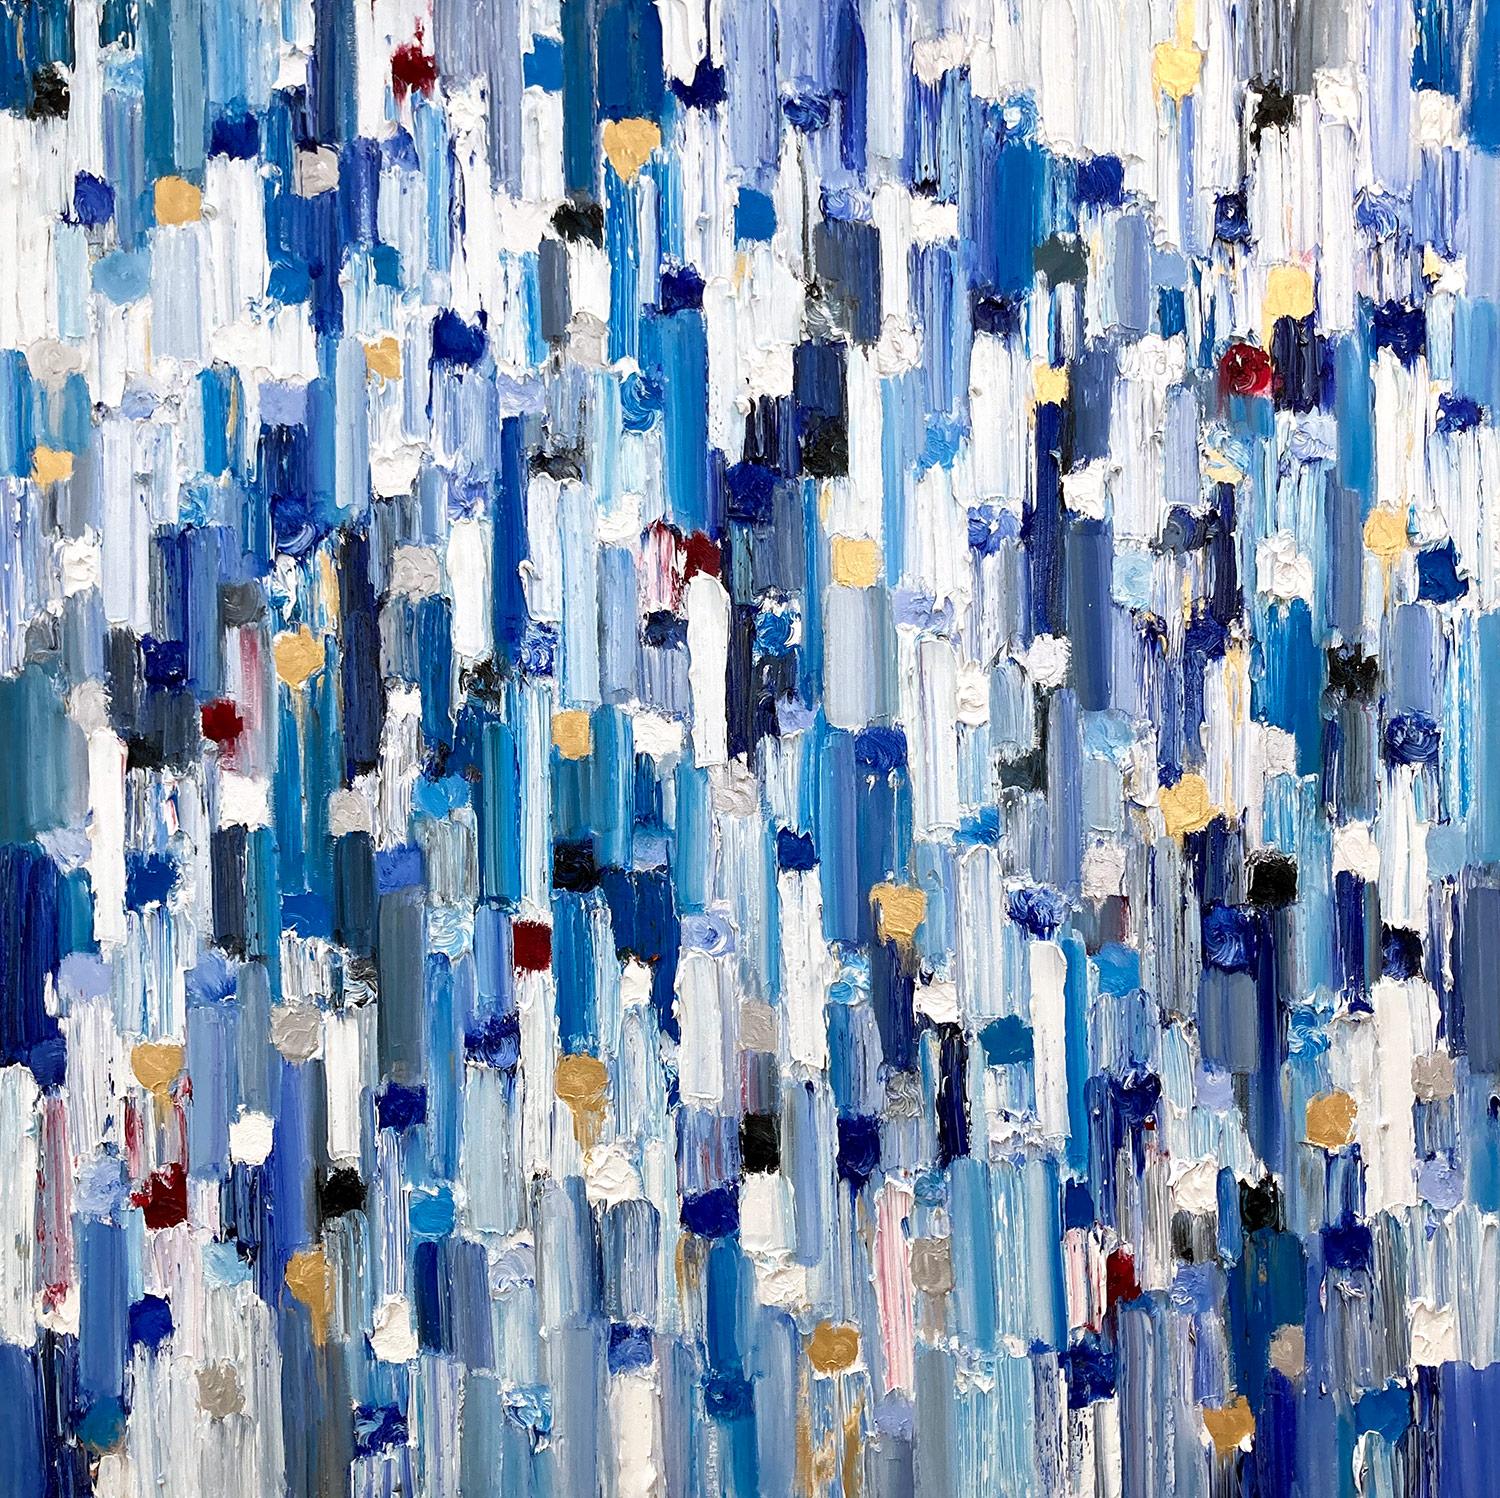 Cindy Shaoul Abstract Painting - "Dripping Dots - Mallorca" Shades of Blue Contemporary Oil Painting on Canvas 